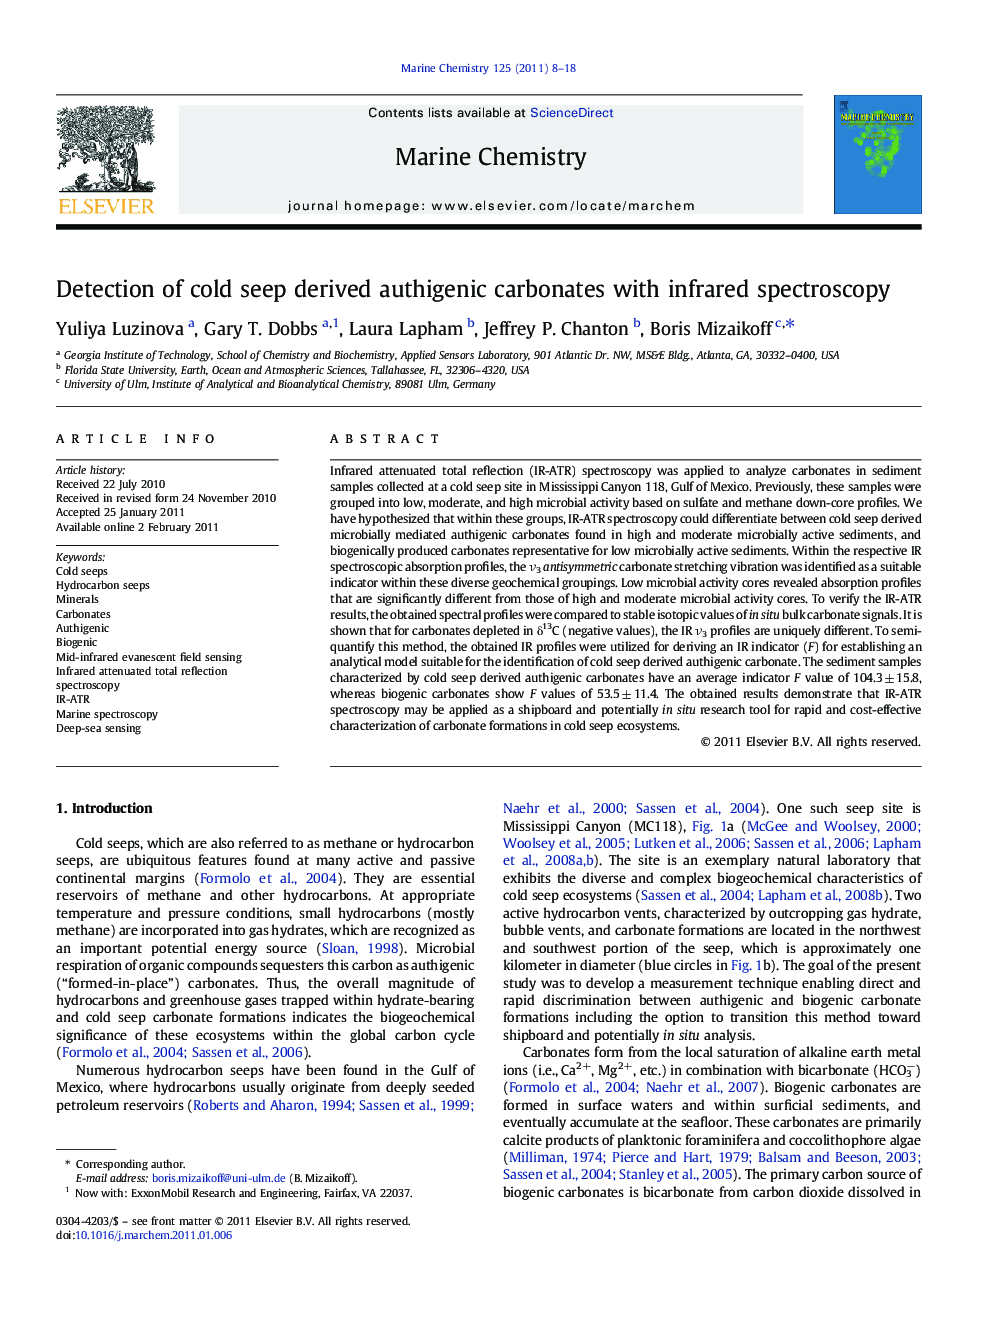 Detection of cold seep derived authigenic carbonates with infrared spectroscopy